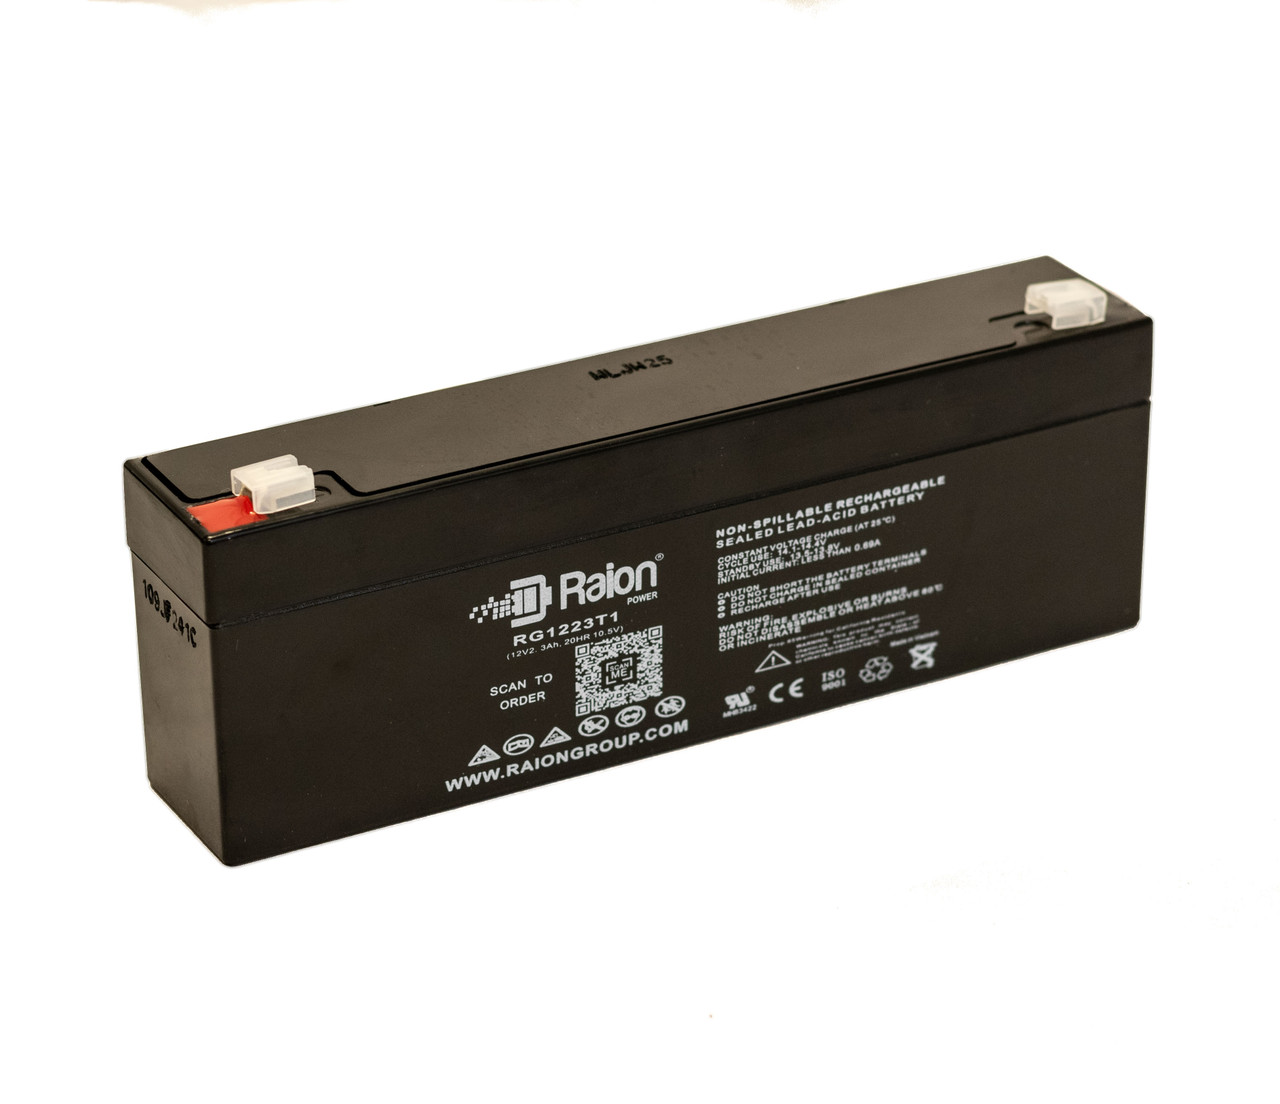 Raion Power RG1223T1 Replacement Battery for PM PM1223